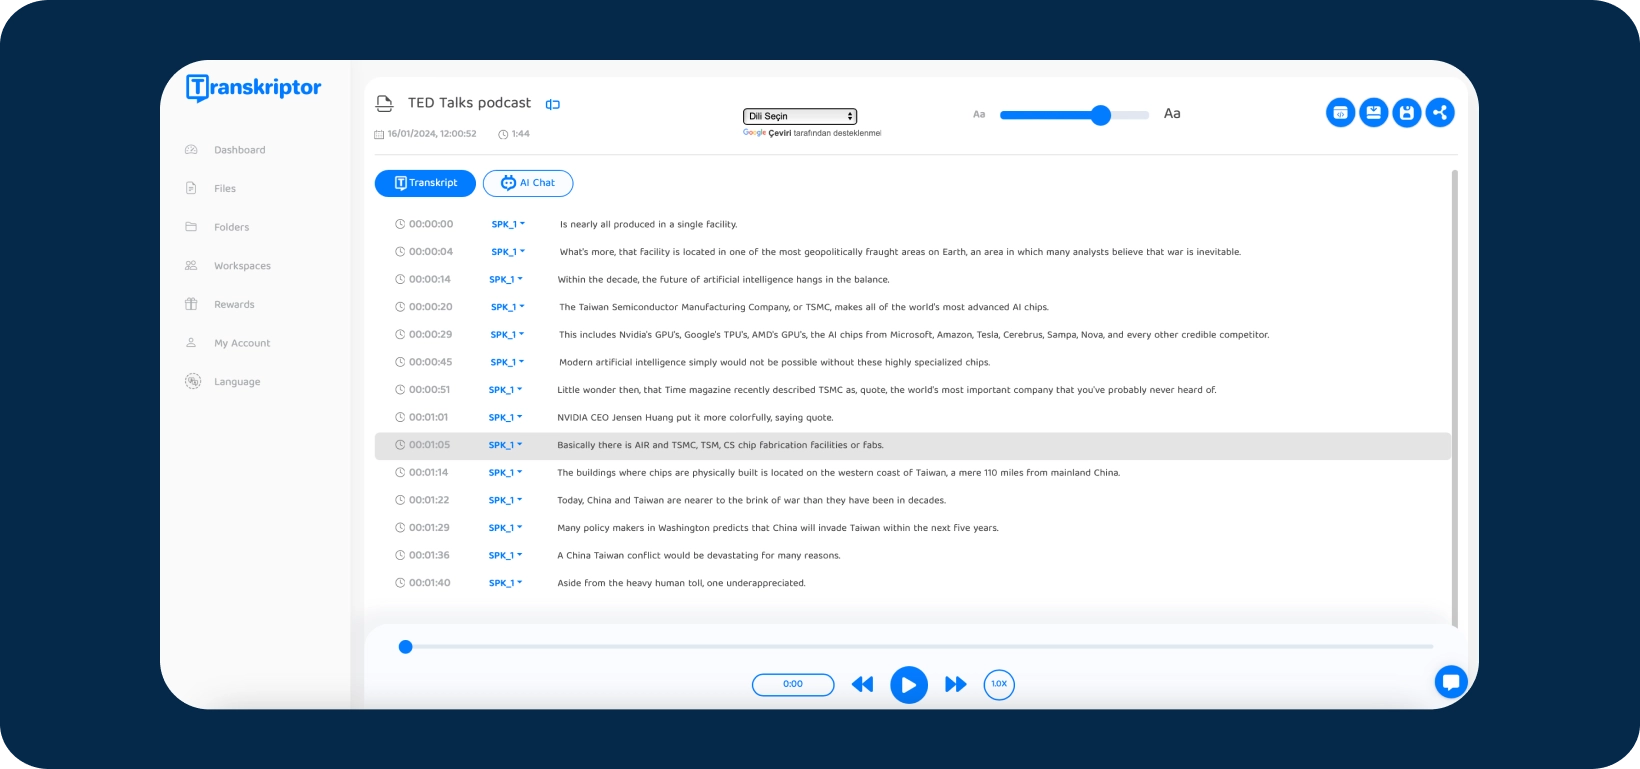 Screenshot of Transkriptor app interface showing a TED Talks podcast being transcribed.